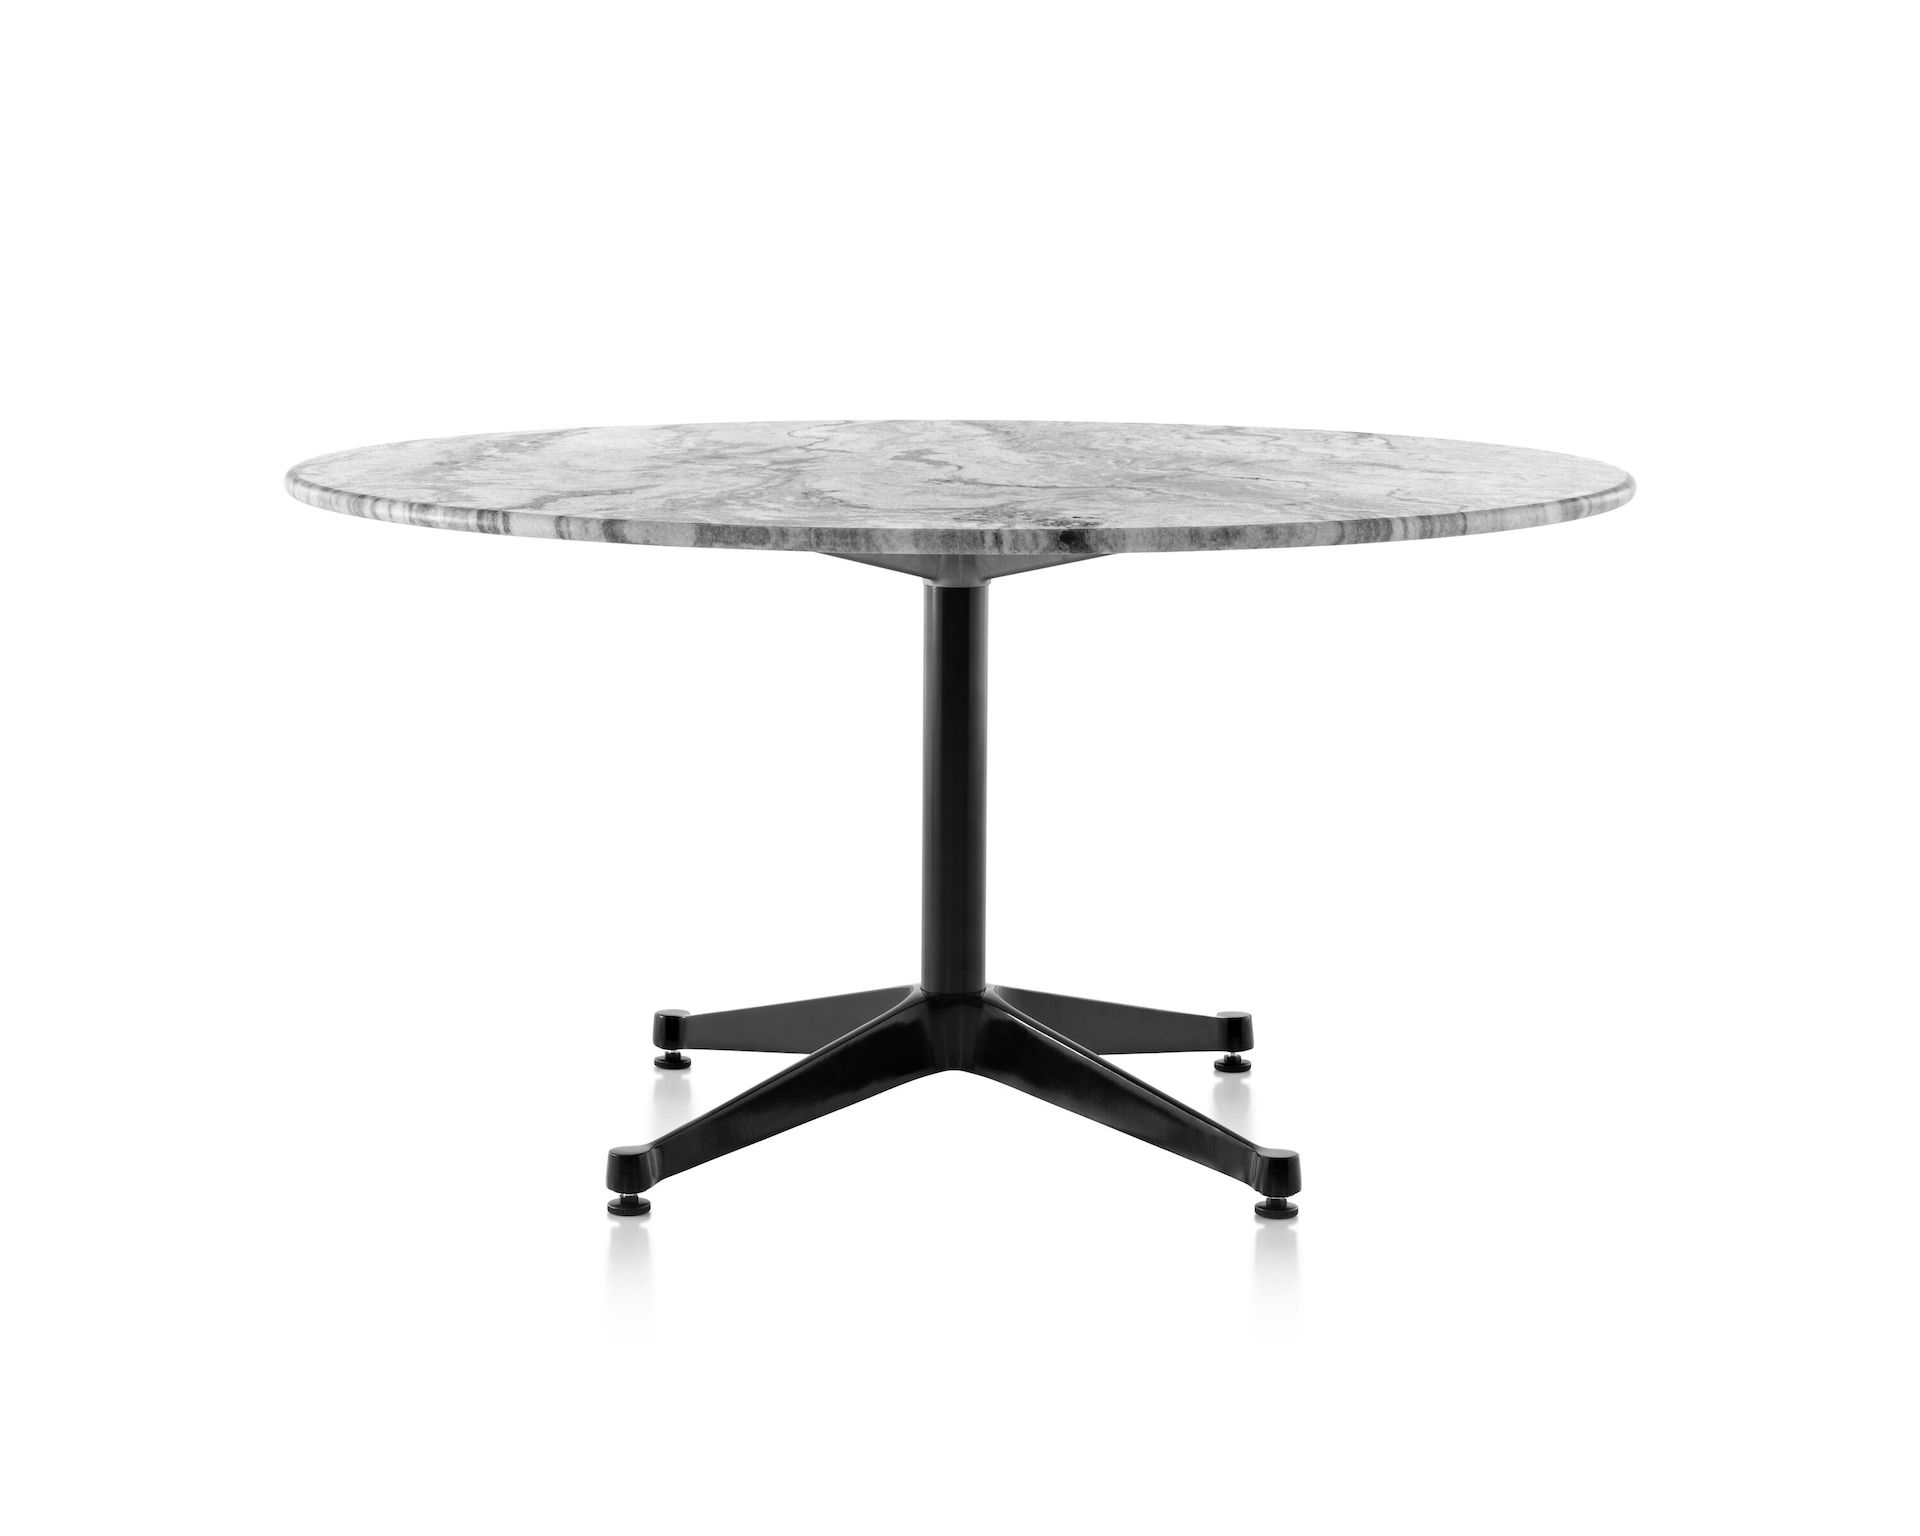 Eames Round Table Outdoor, Contract Base, Stone Top - Herman Miller